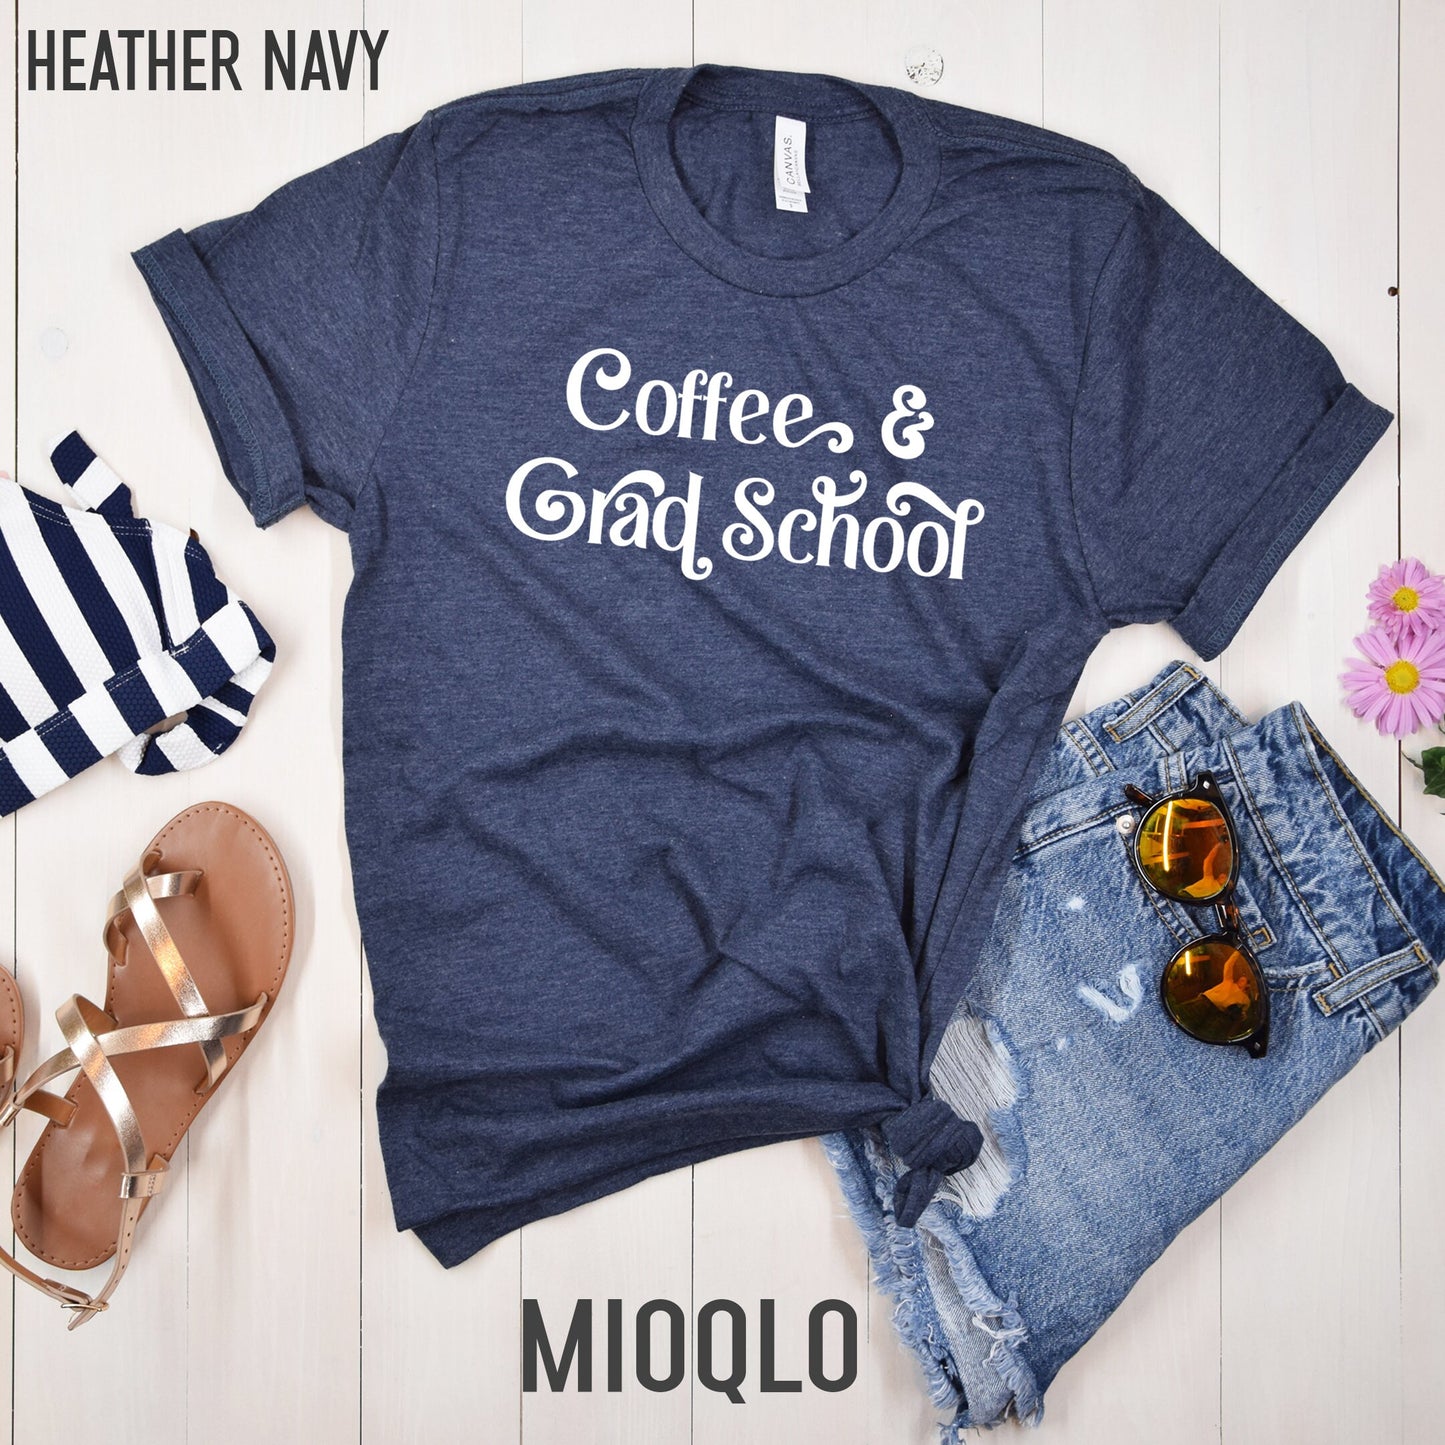 Coffee and Grad School Shirt, Phd Student, Phd Tee, Doctorate Gifts, Masters Degree Student Shirt, mba Graduate Degree Gift, Grad Student